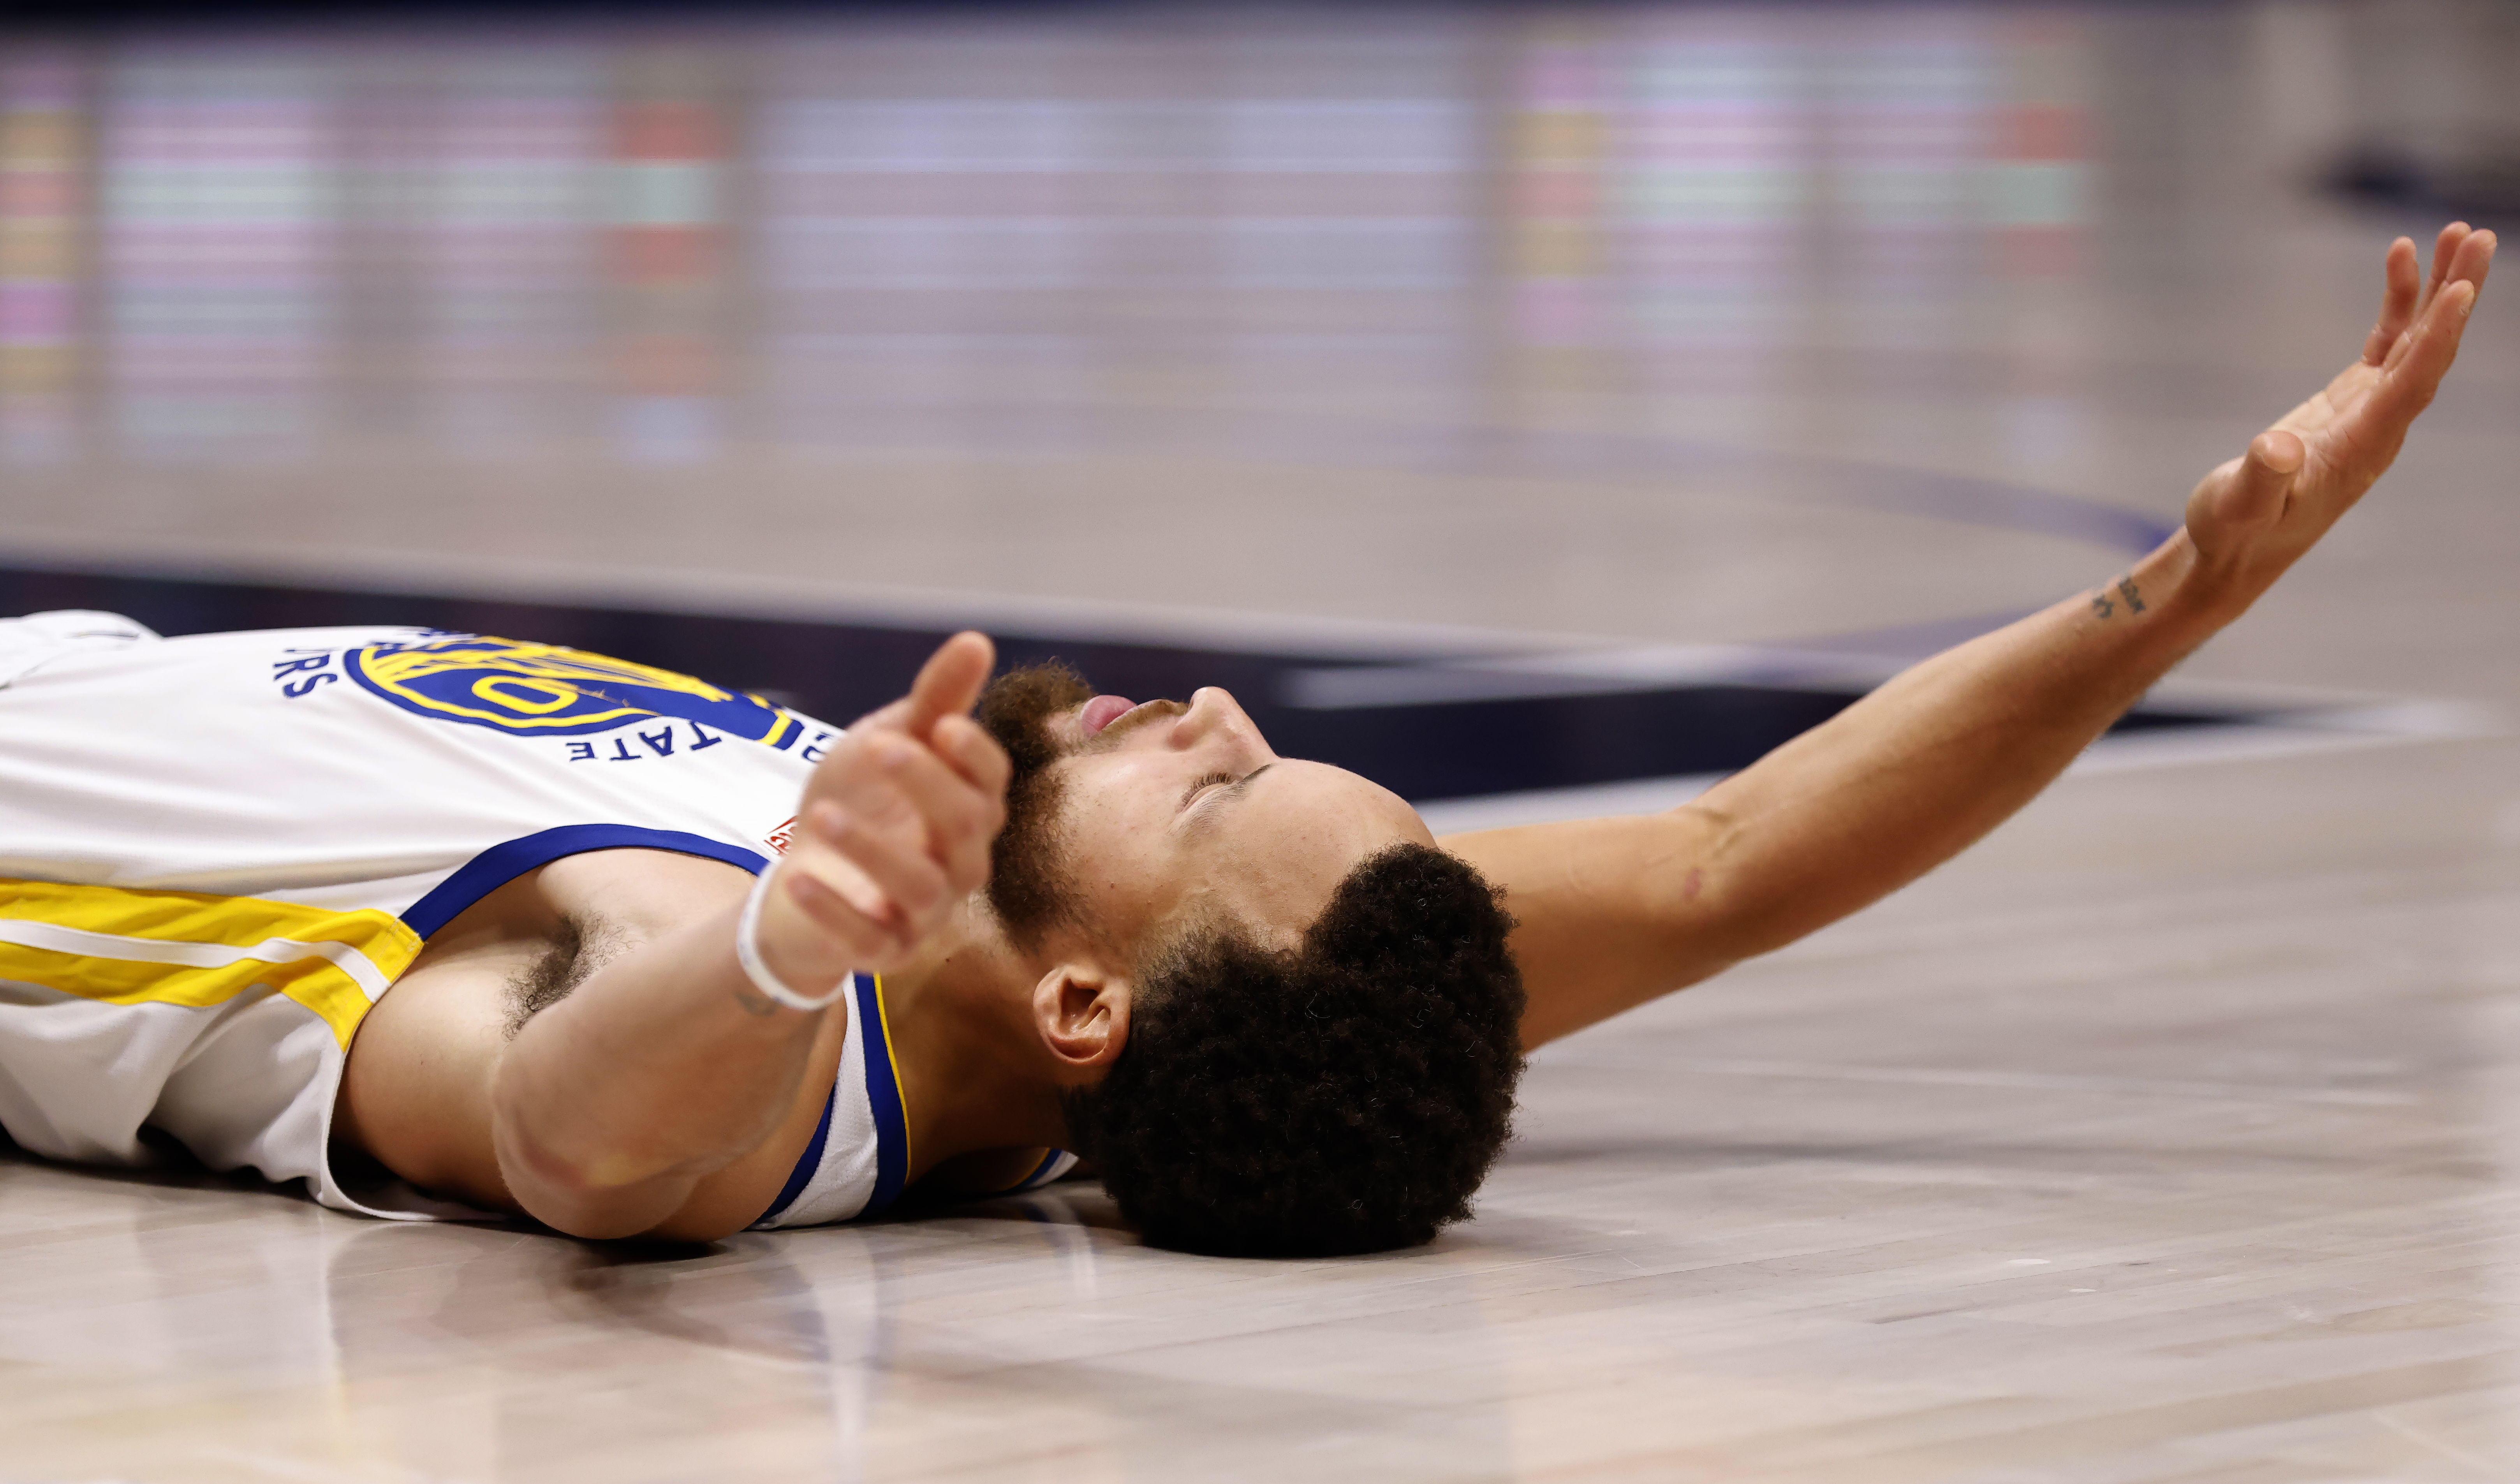 Steph Curry laying on his back with his arms extended